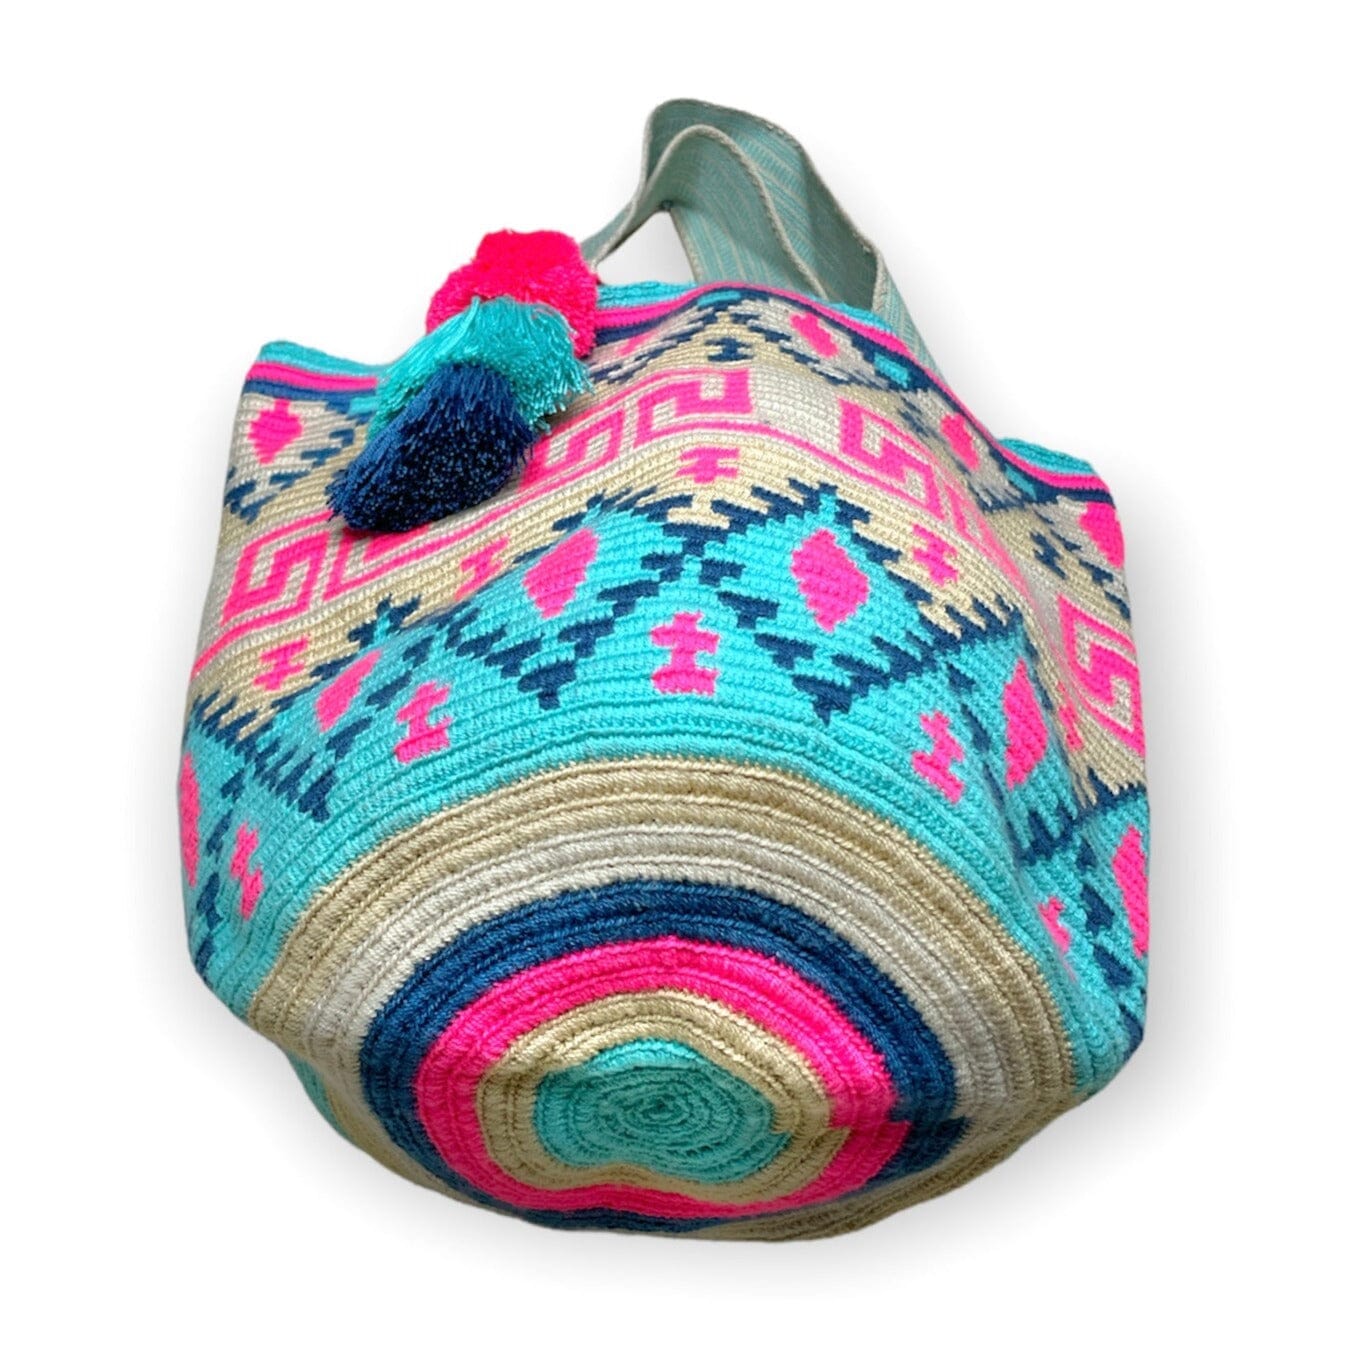 Bottom view | Turquoise/ Hot Pink Large Crochet Tote Bag for summer | Colorful 4U